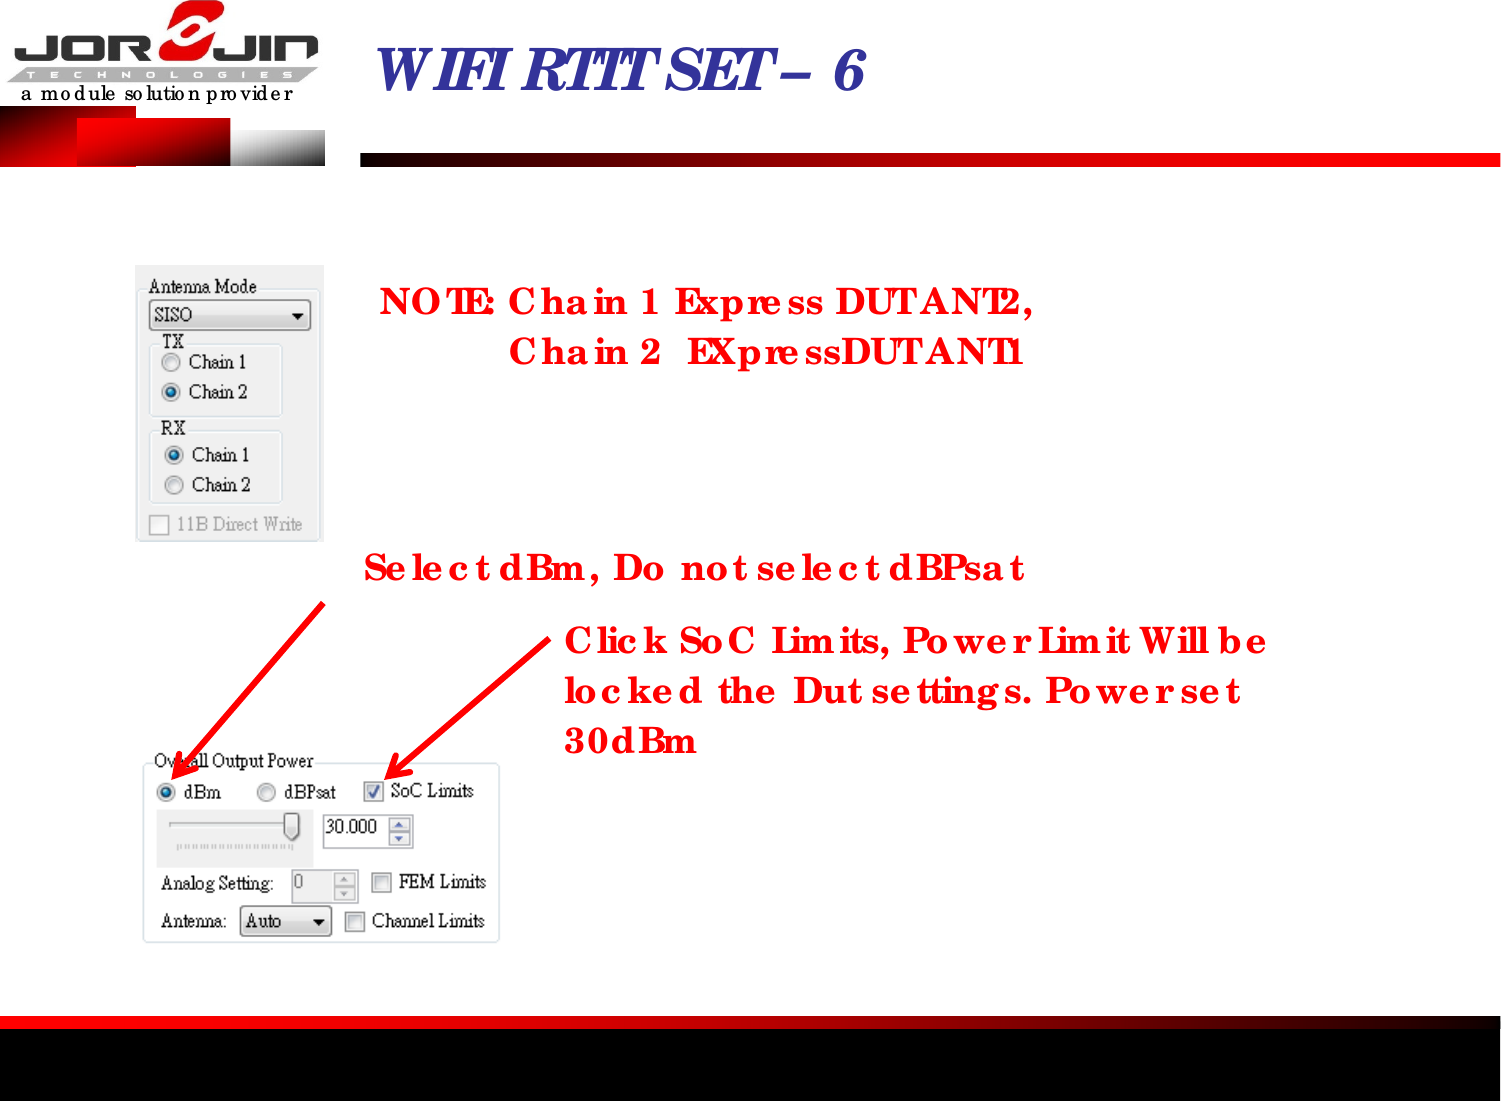 a  mo d ule  so lutio n p ro vid e r WIFI RTTTSET– 6NO TE: C ha in 1 Expre ss DUTANT2, Cha in 2 EXpre ssDUTANT1 Se le c t dBm, Do  no t se le c t dBPsa tClic k So C  Lim its, Po we r Lim it Will be  lo c ke d the  Dut se tting s. Po we r se t 30dBm  